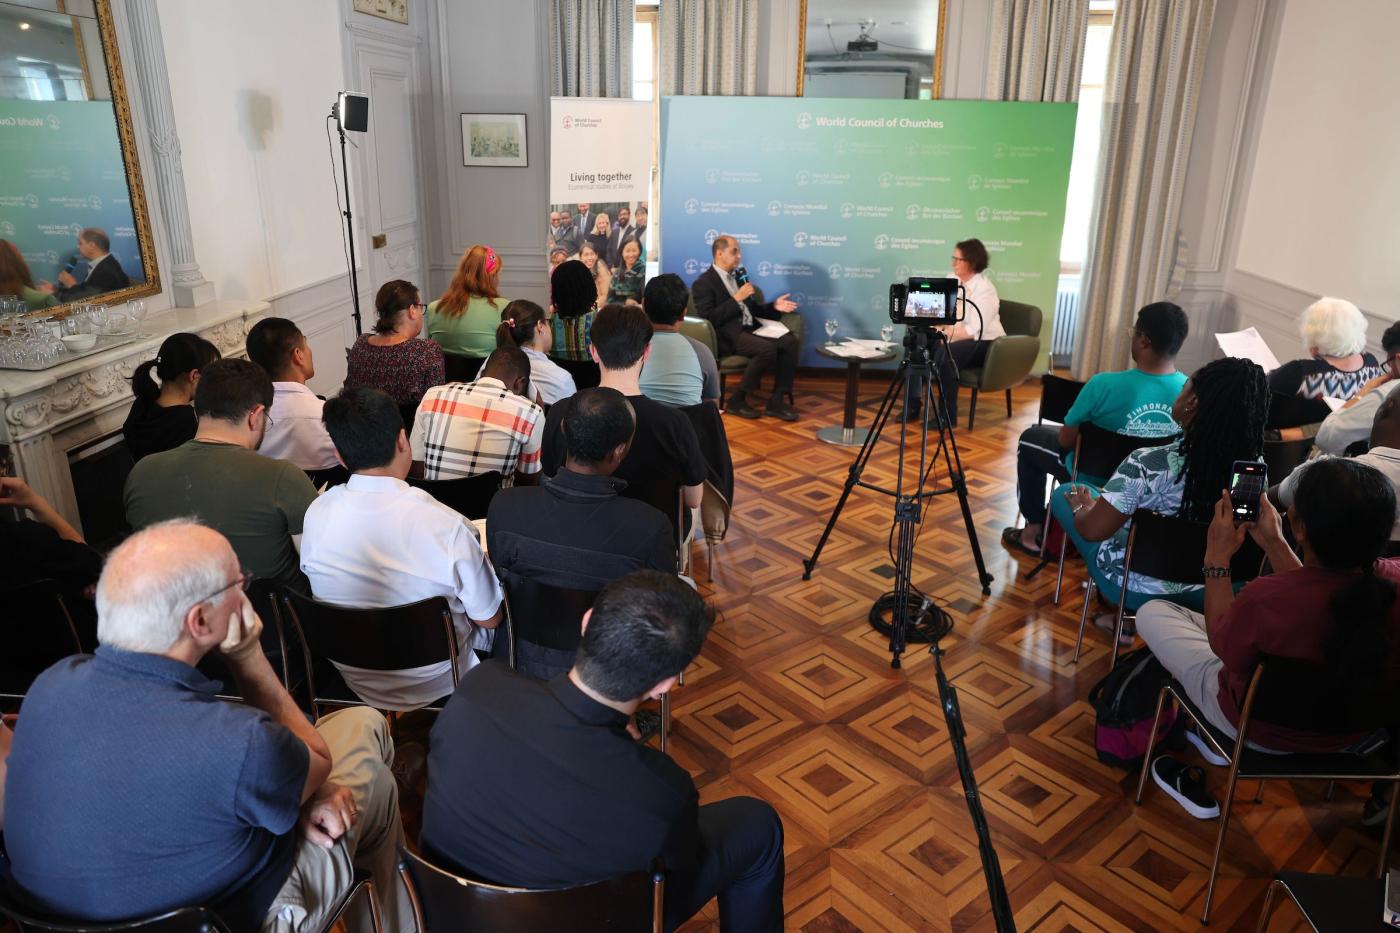 On 28 July, the launch of the document “Building Interreligious Solidarity in Our Wounded World. The Way of Common Formation” took place at the Ecumenical Institute at Bossey, Photo: Gloria Koymans/WCC